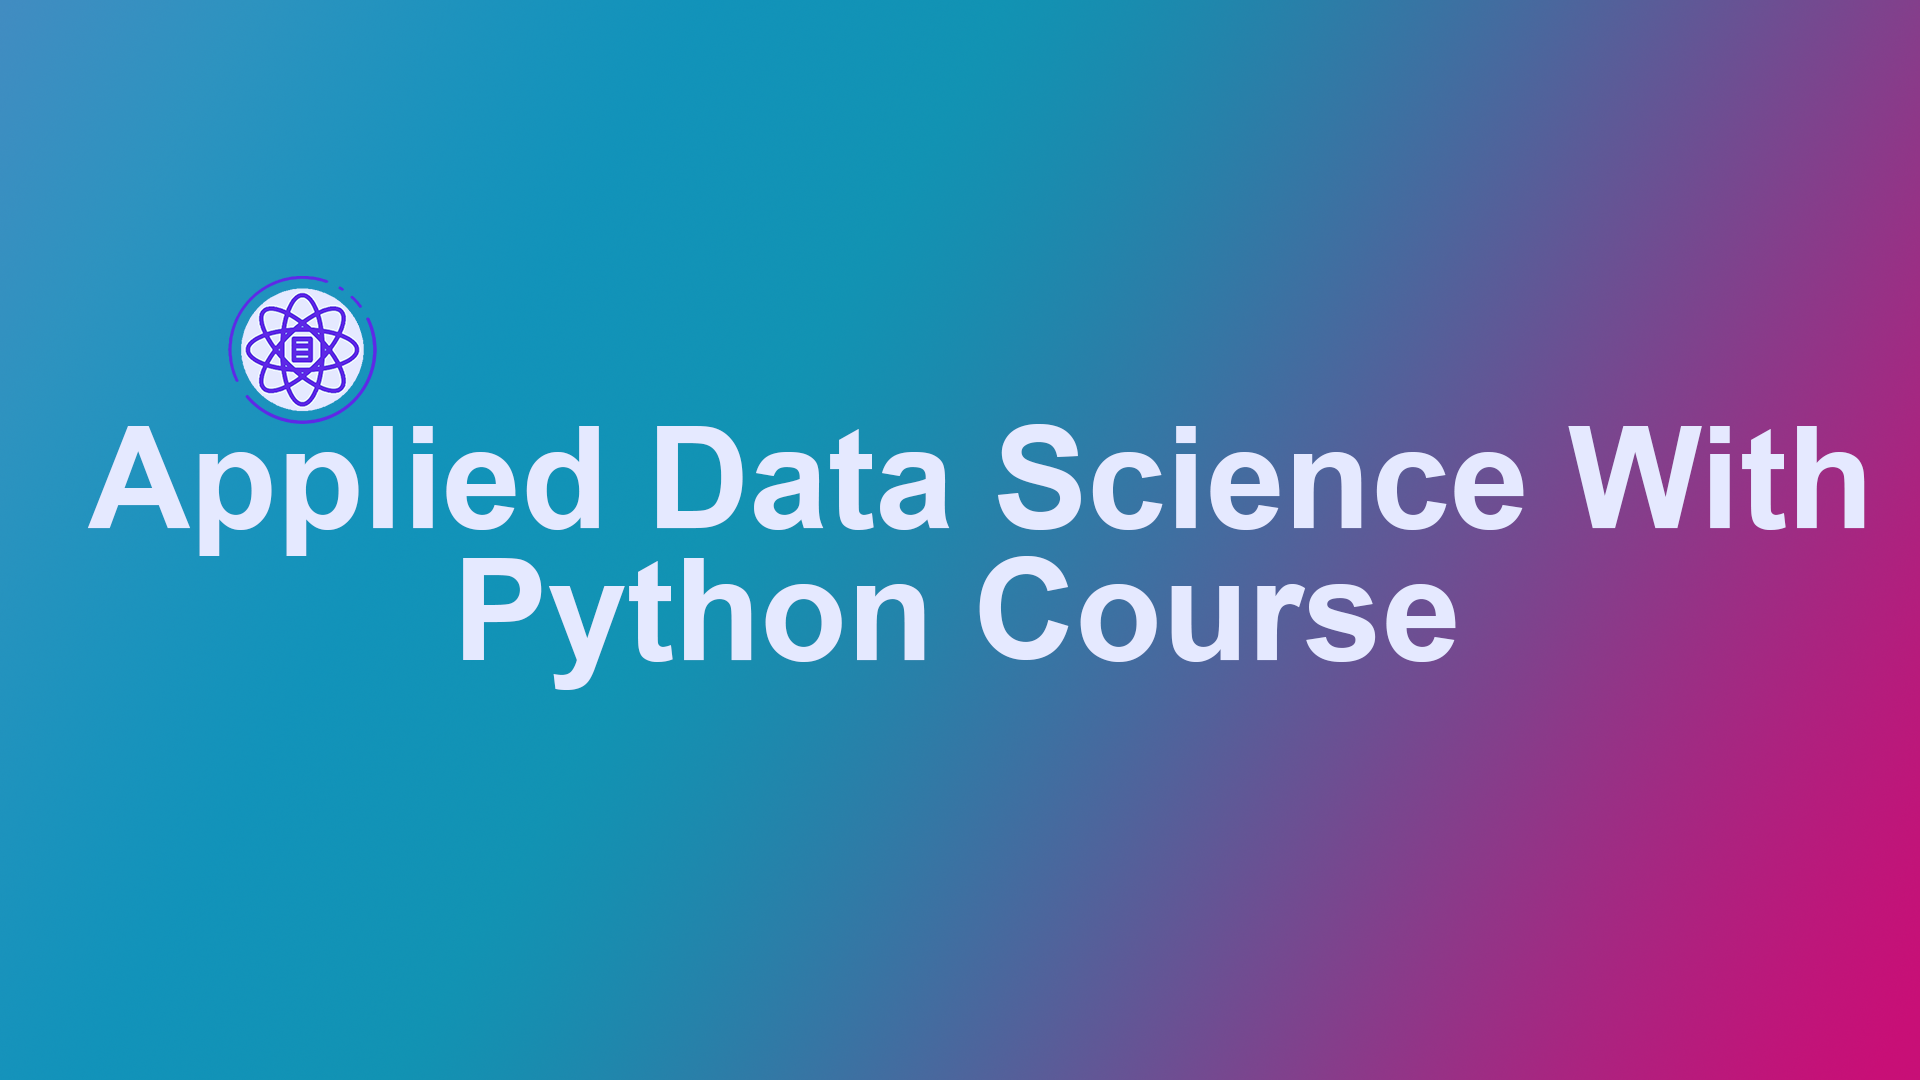 Applied Data Science with Python Course